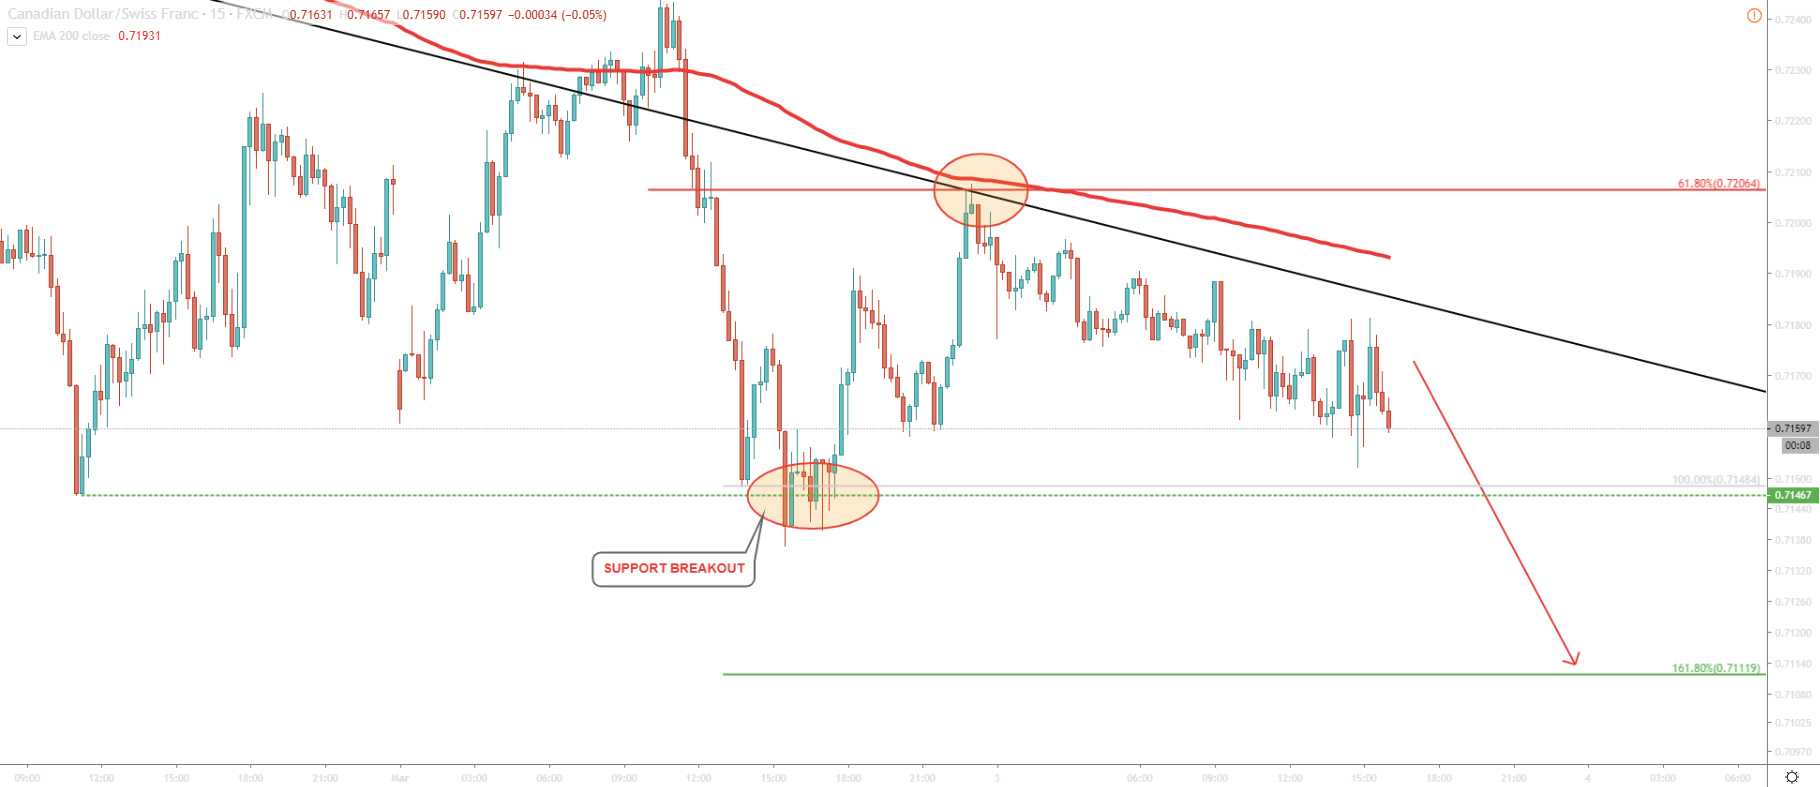 CAD/CHF 15-Minute Technical Analysis 3 Mar 2020